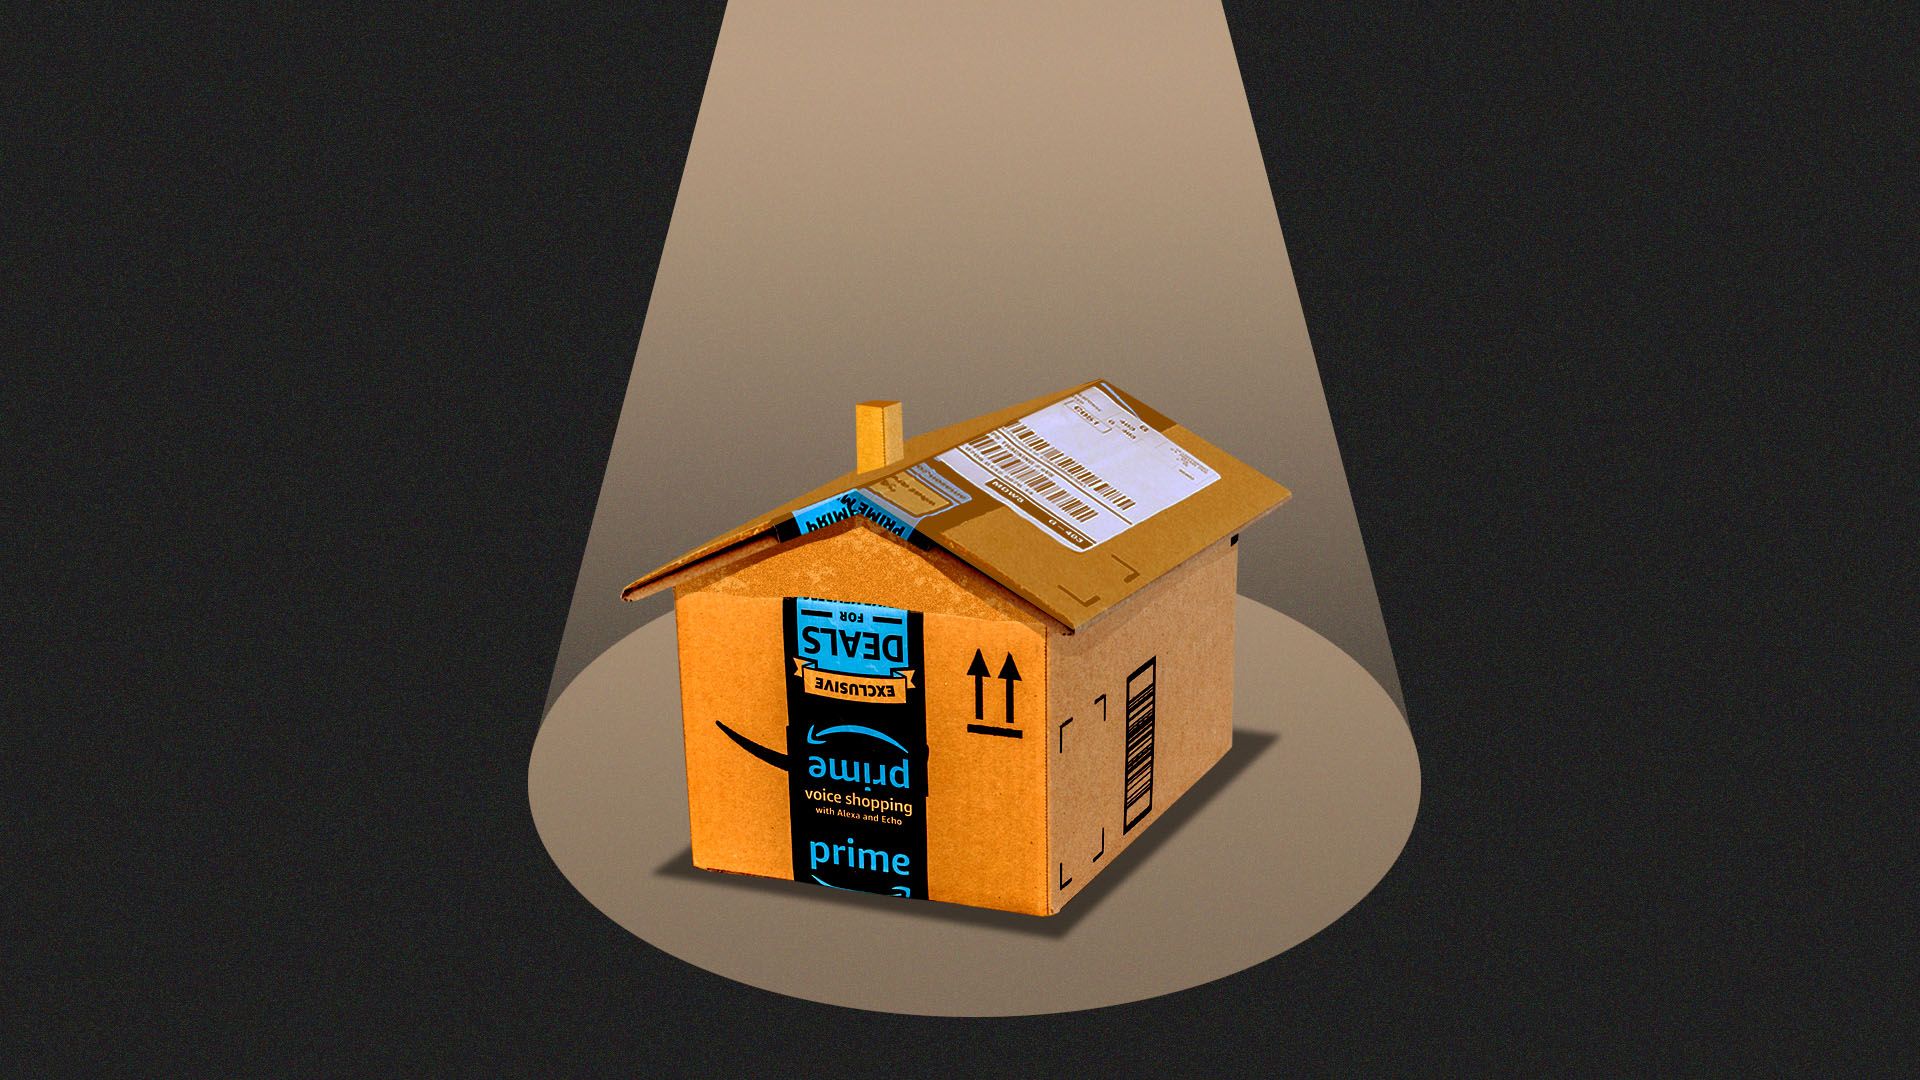 Illustration of an Amazon box house with a spotlight on it